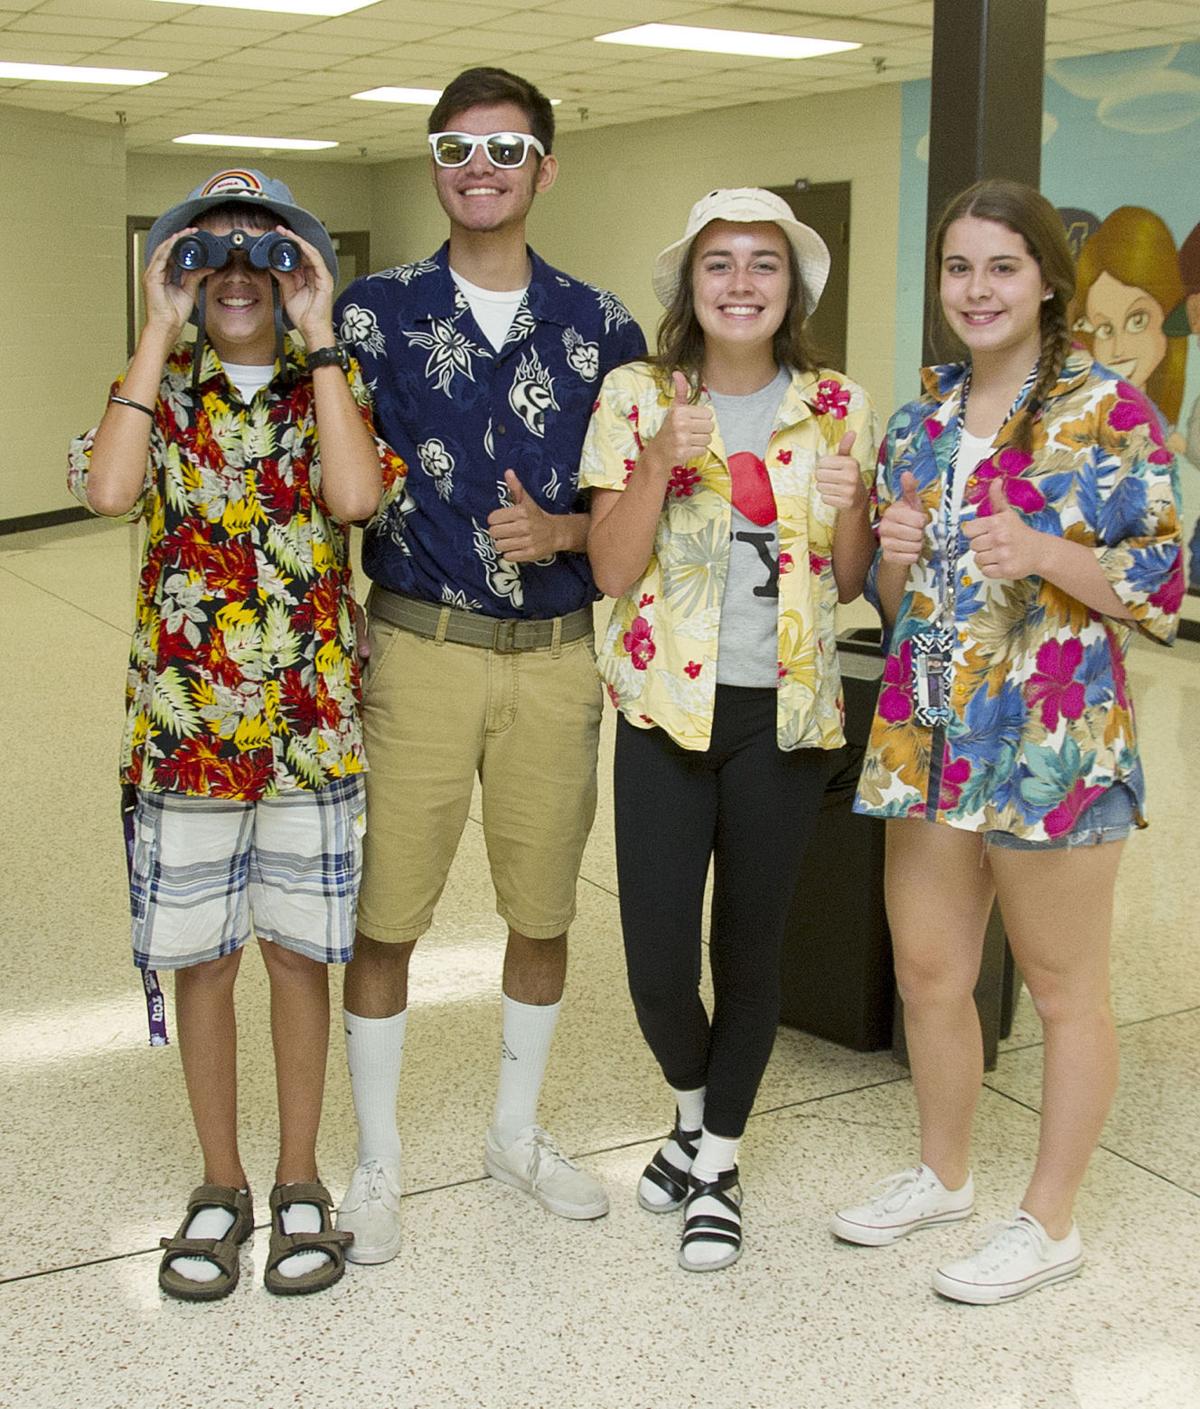 Getting in the spirit: MHS students and teachers dress as 